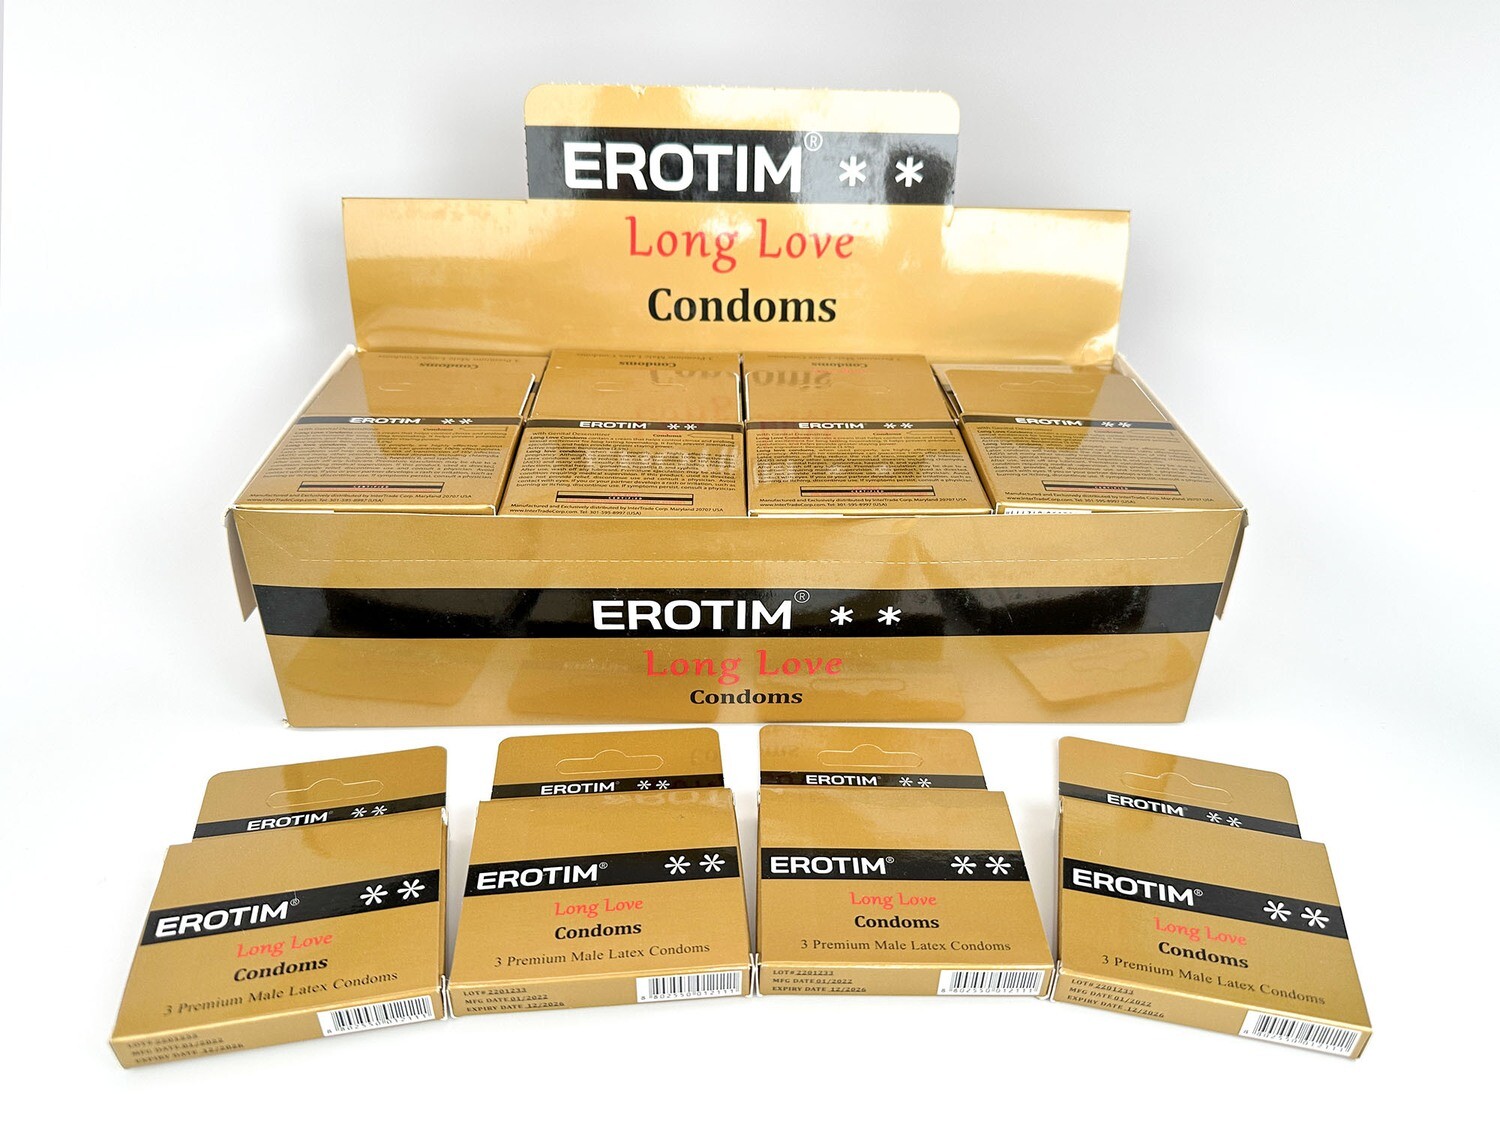 Wholesale - Long Love® Erotim® Condom Gold Packing - Lot of 5 display cases (each containing 144 condoms) - Total 720 condoms